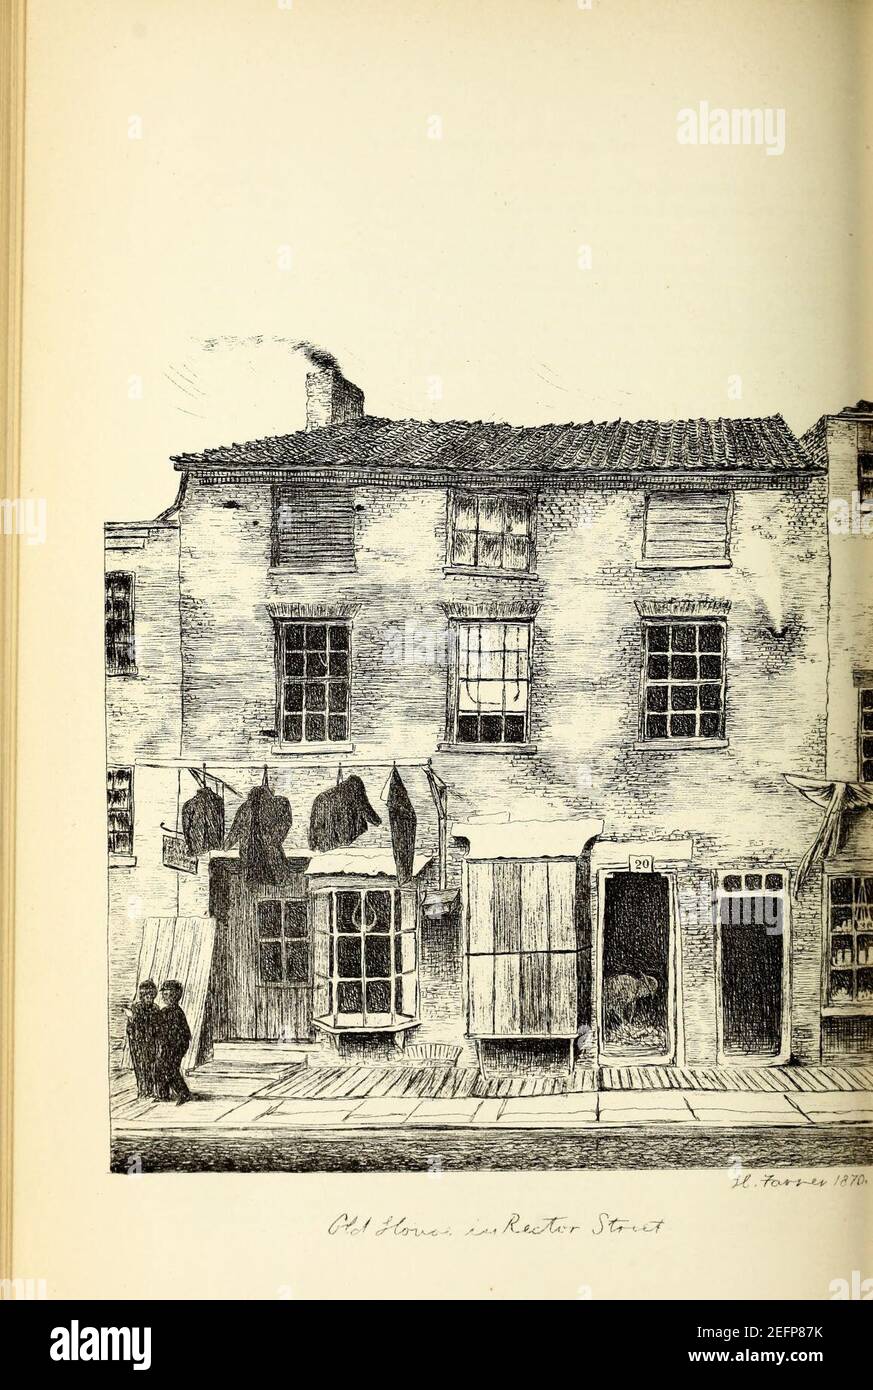 Old House in Rector Street, New York City, Henry Farrer 1870. Stock Photo